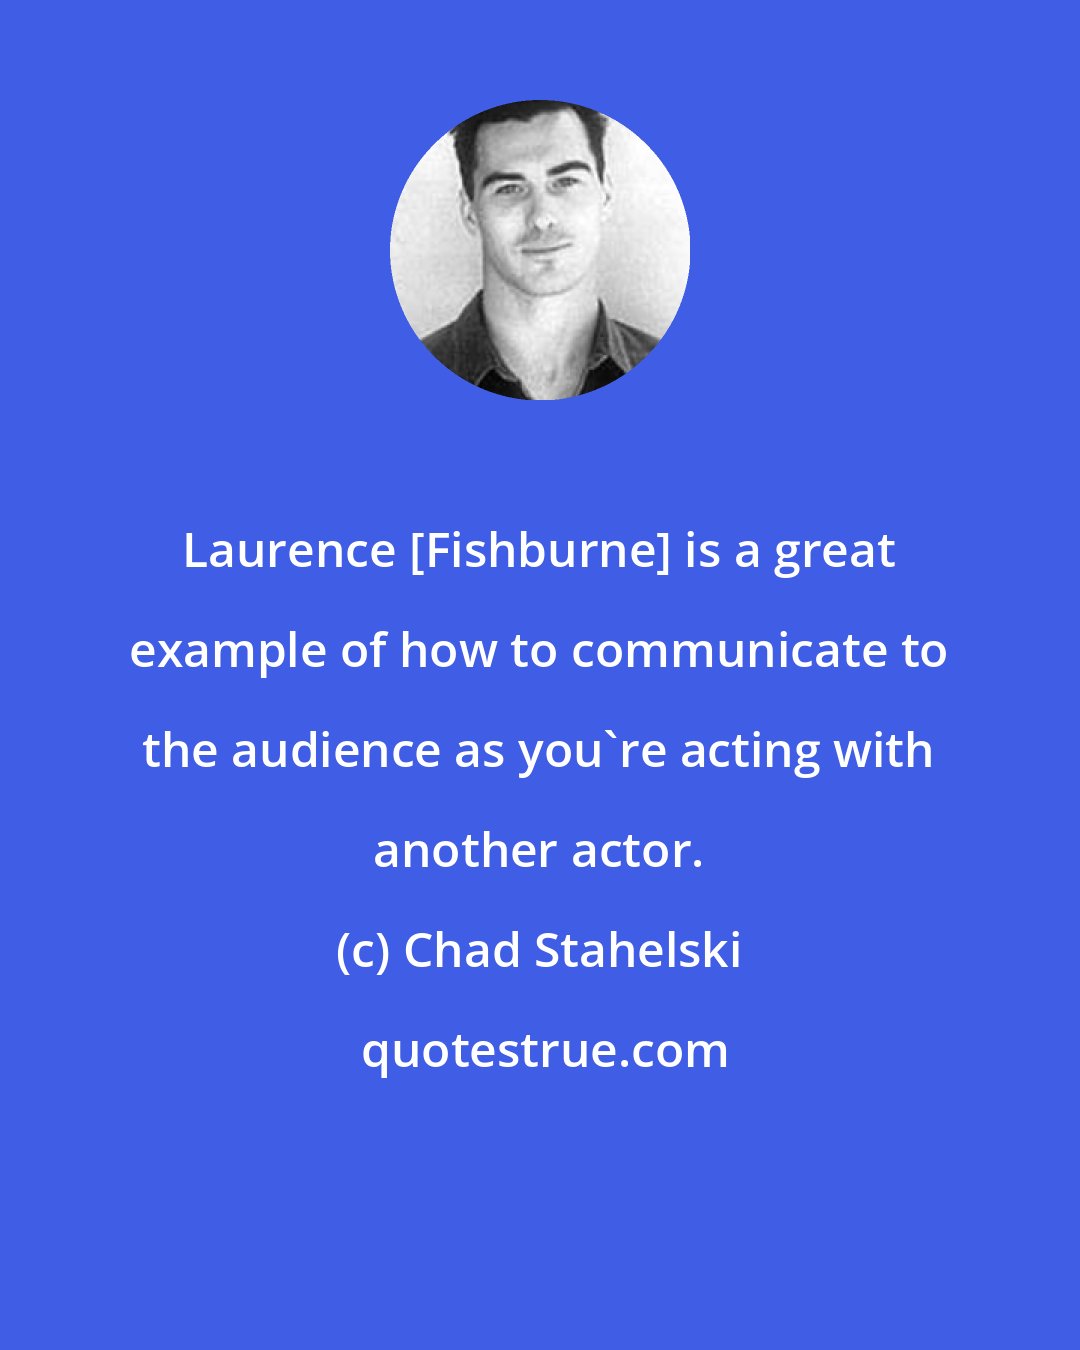 Chad Stahelski: Laurence [Fishburne] is a great example of how to communicate to the audience as you're acting with another actor.